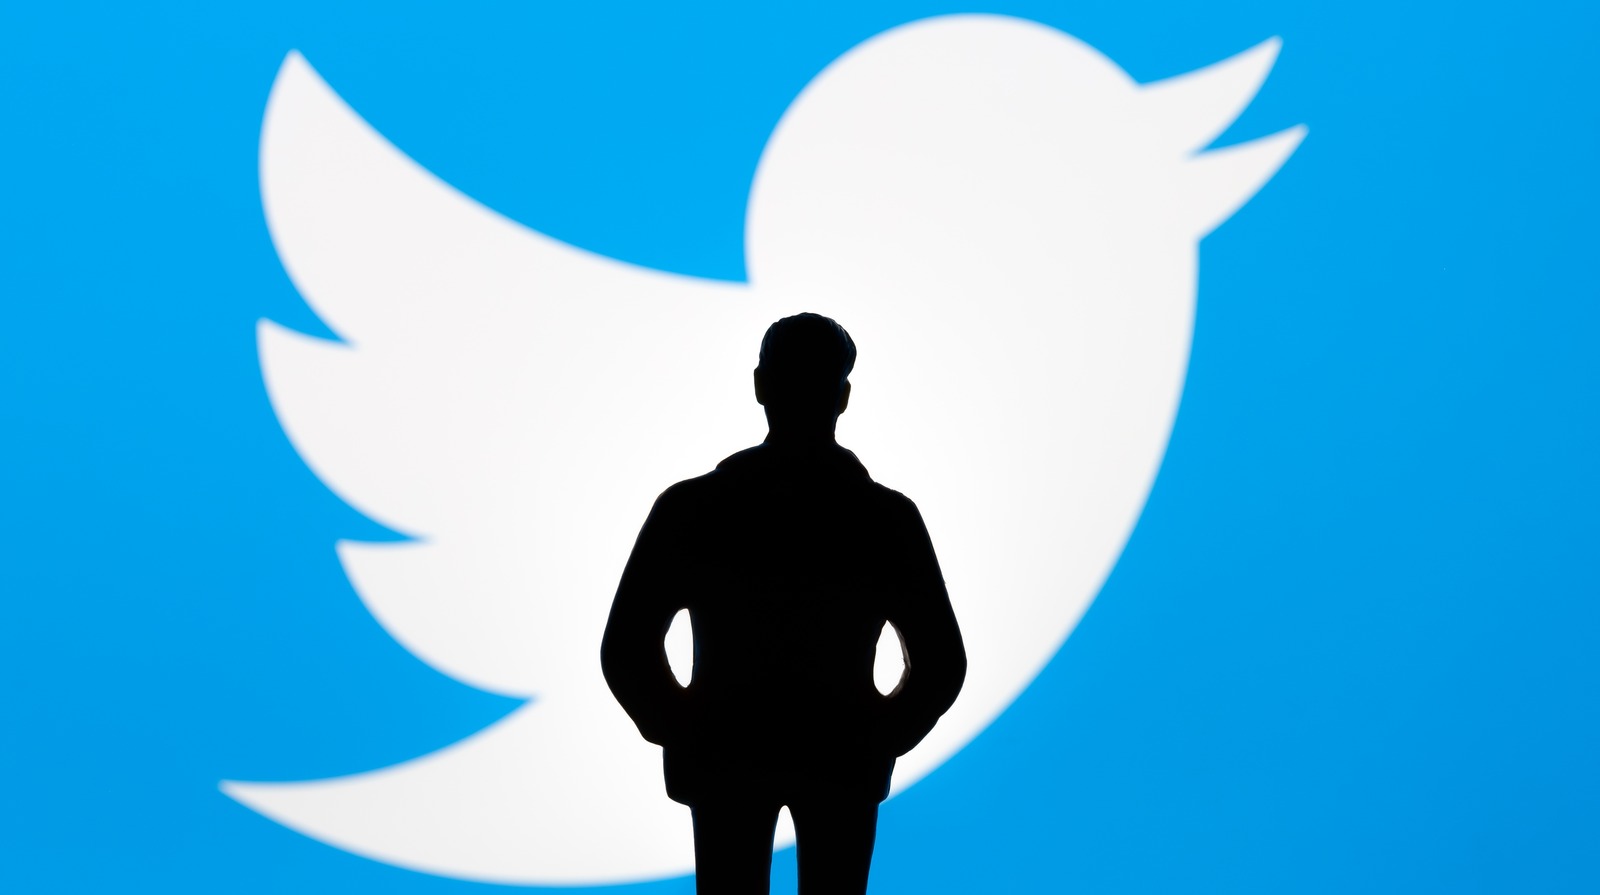 twitter-moves-to-automate-its-moderation-systems-slashgear